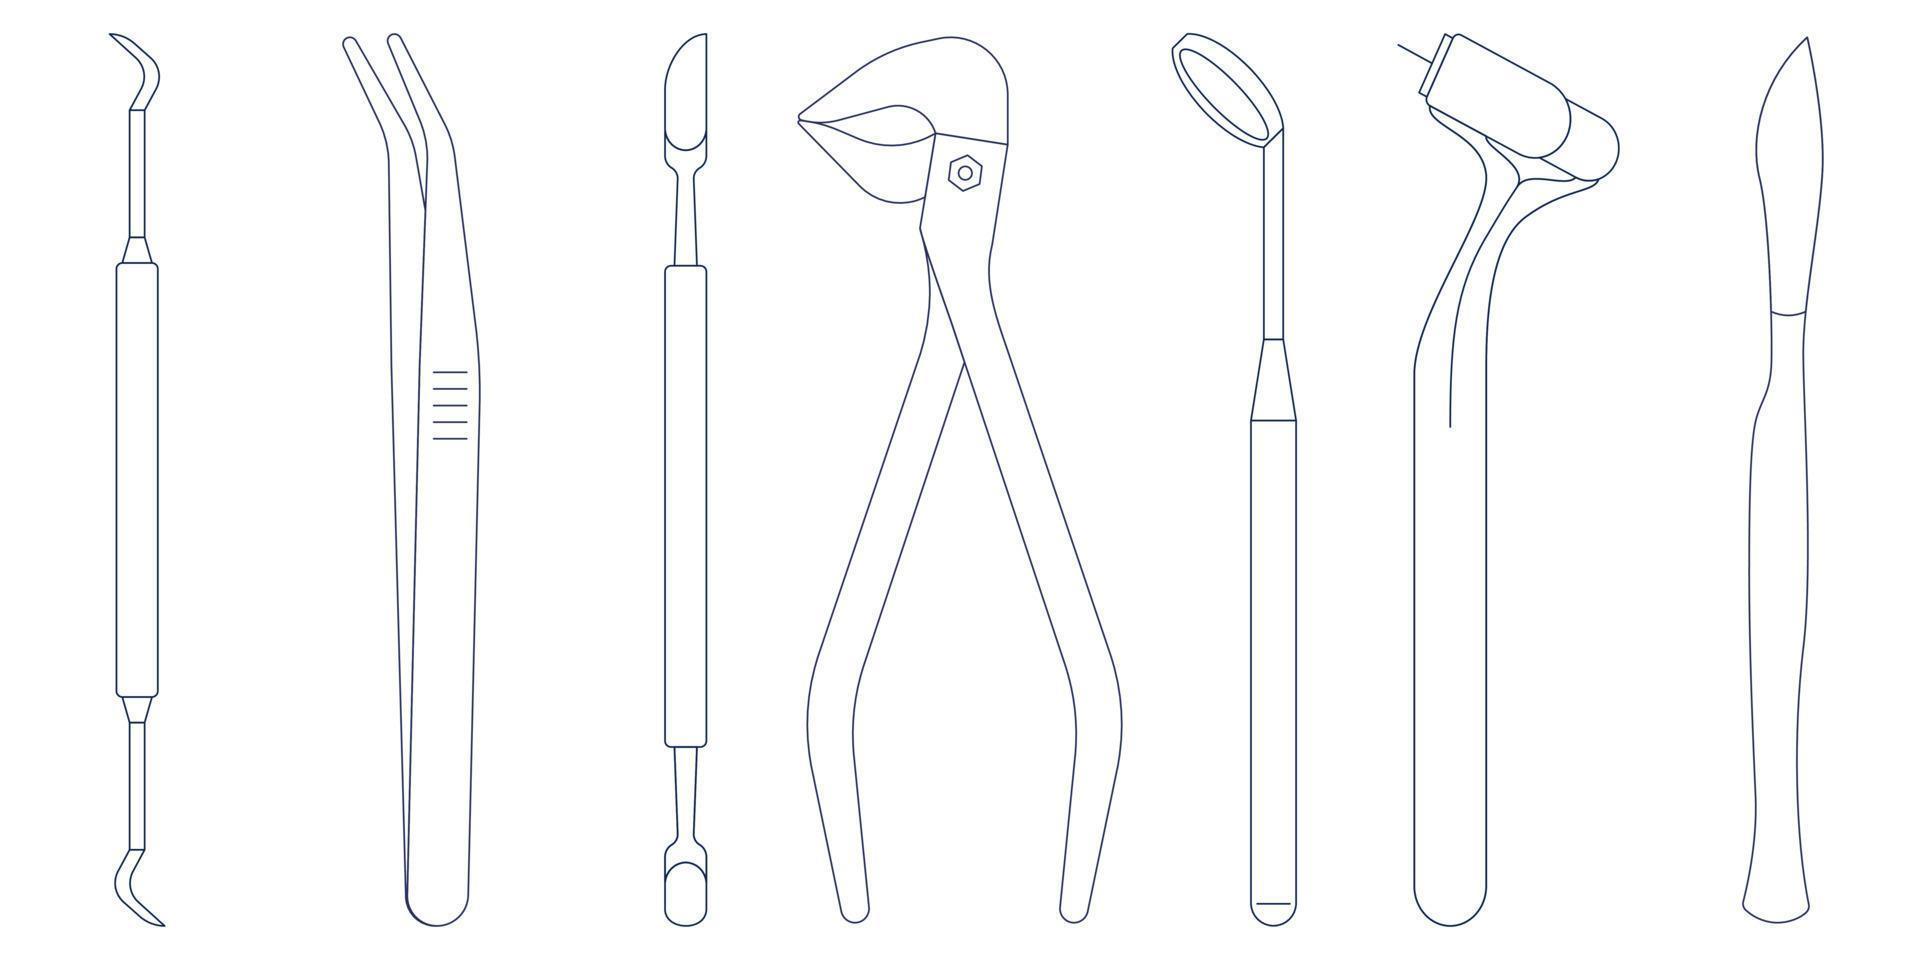 Dental tools and instruments icons set. Stomatology supplies vector icon in a flat style isolated on a white background.